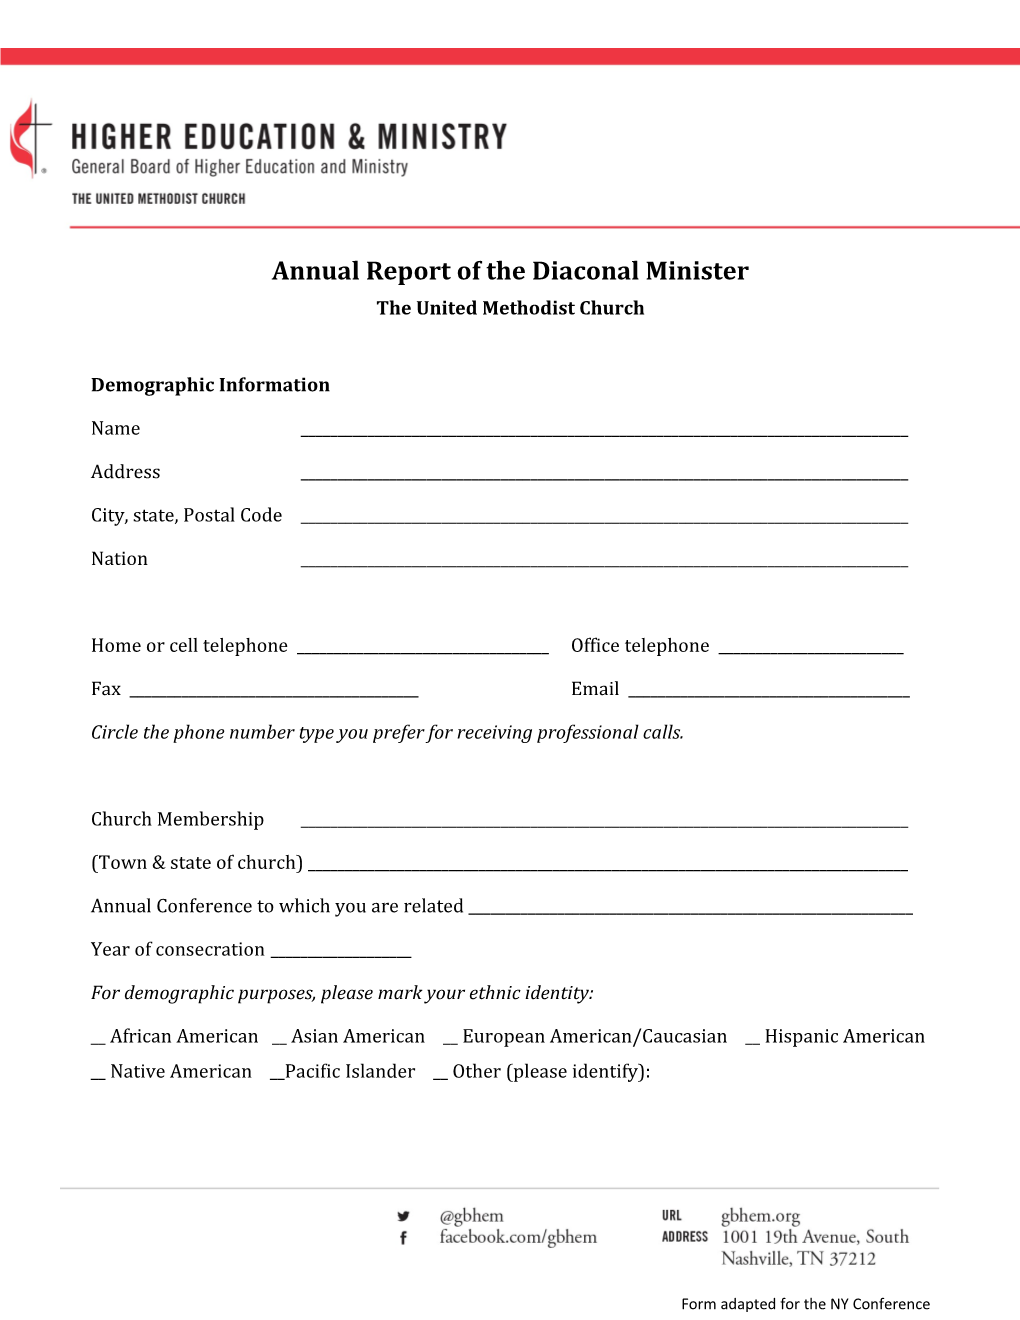 Annual Report of the Diaconal Minister